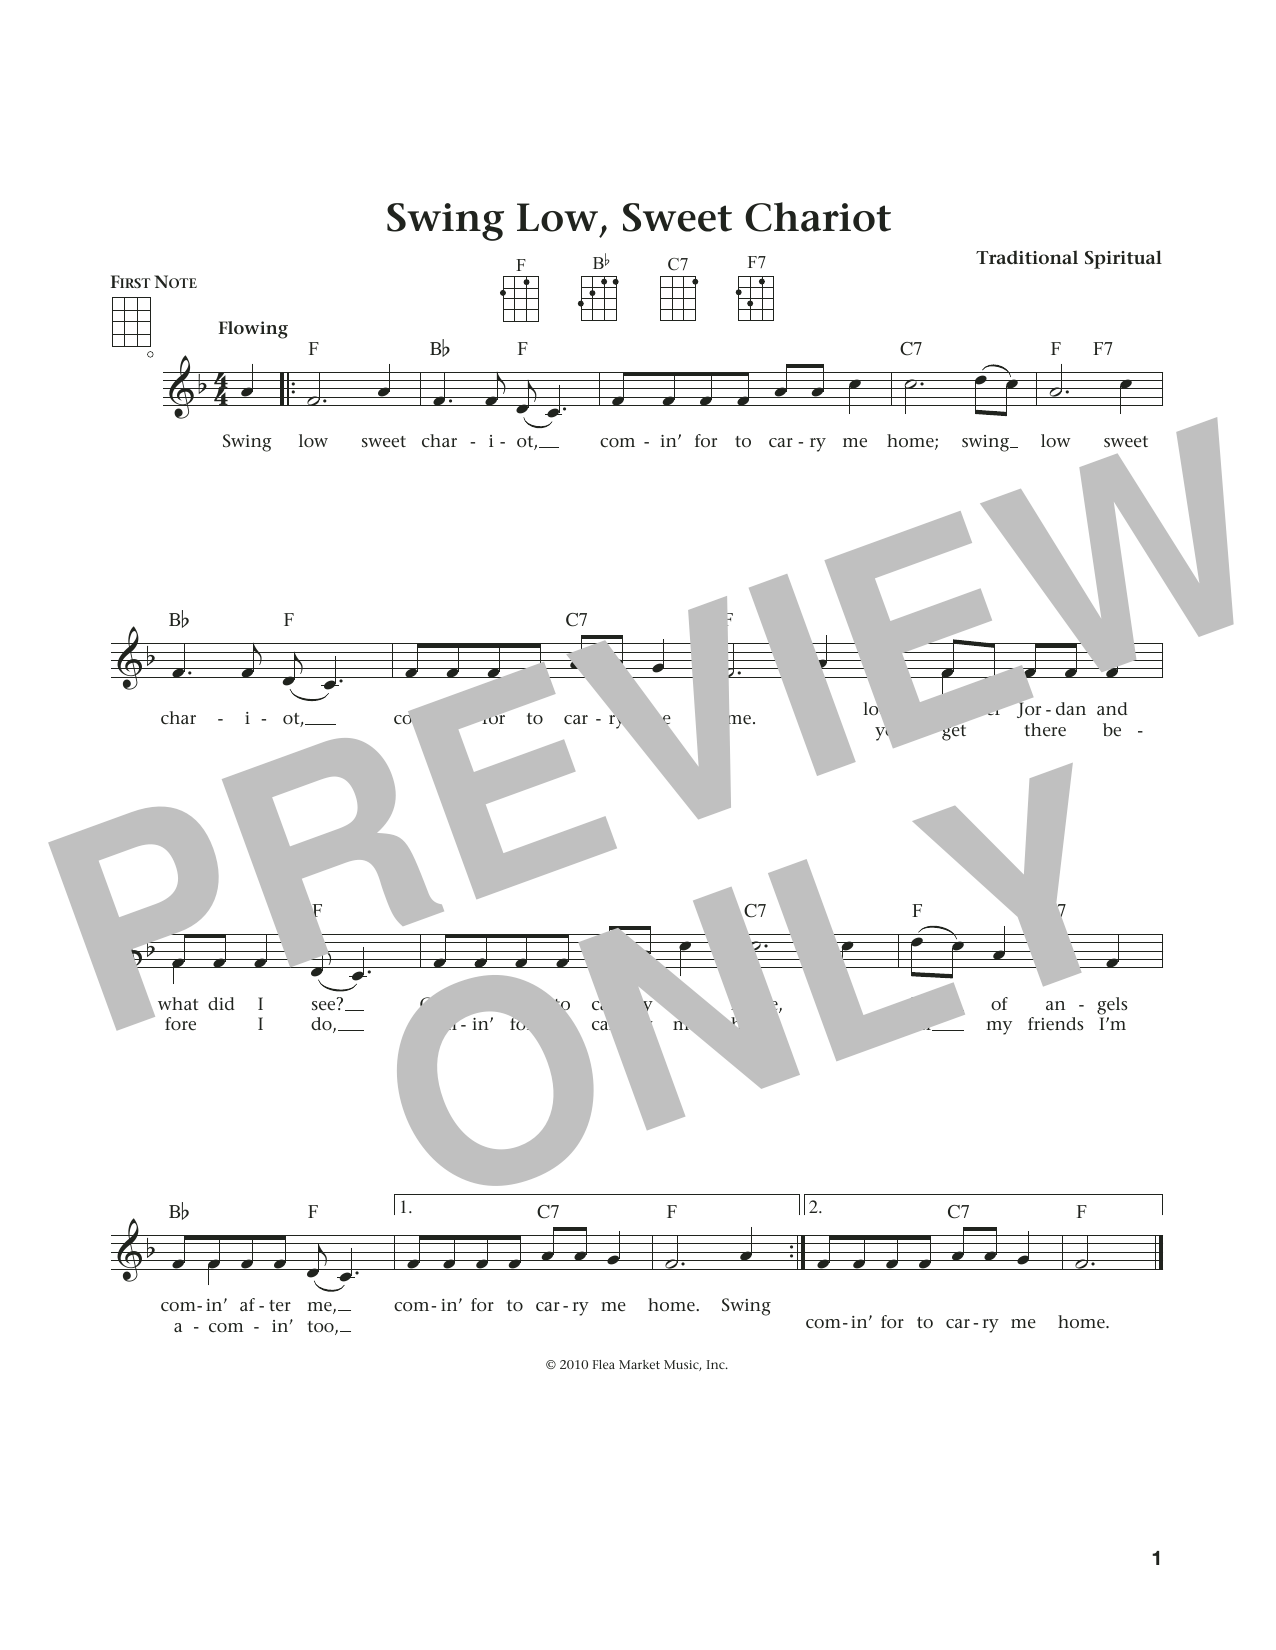 Download Traditional Spiritual Swing Low, Sweet Chariot (from The Dail Sheet Music